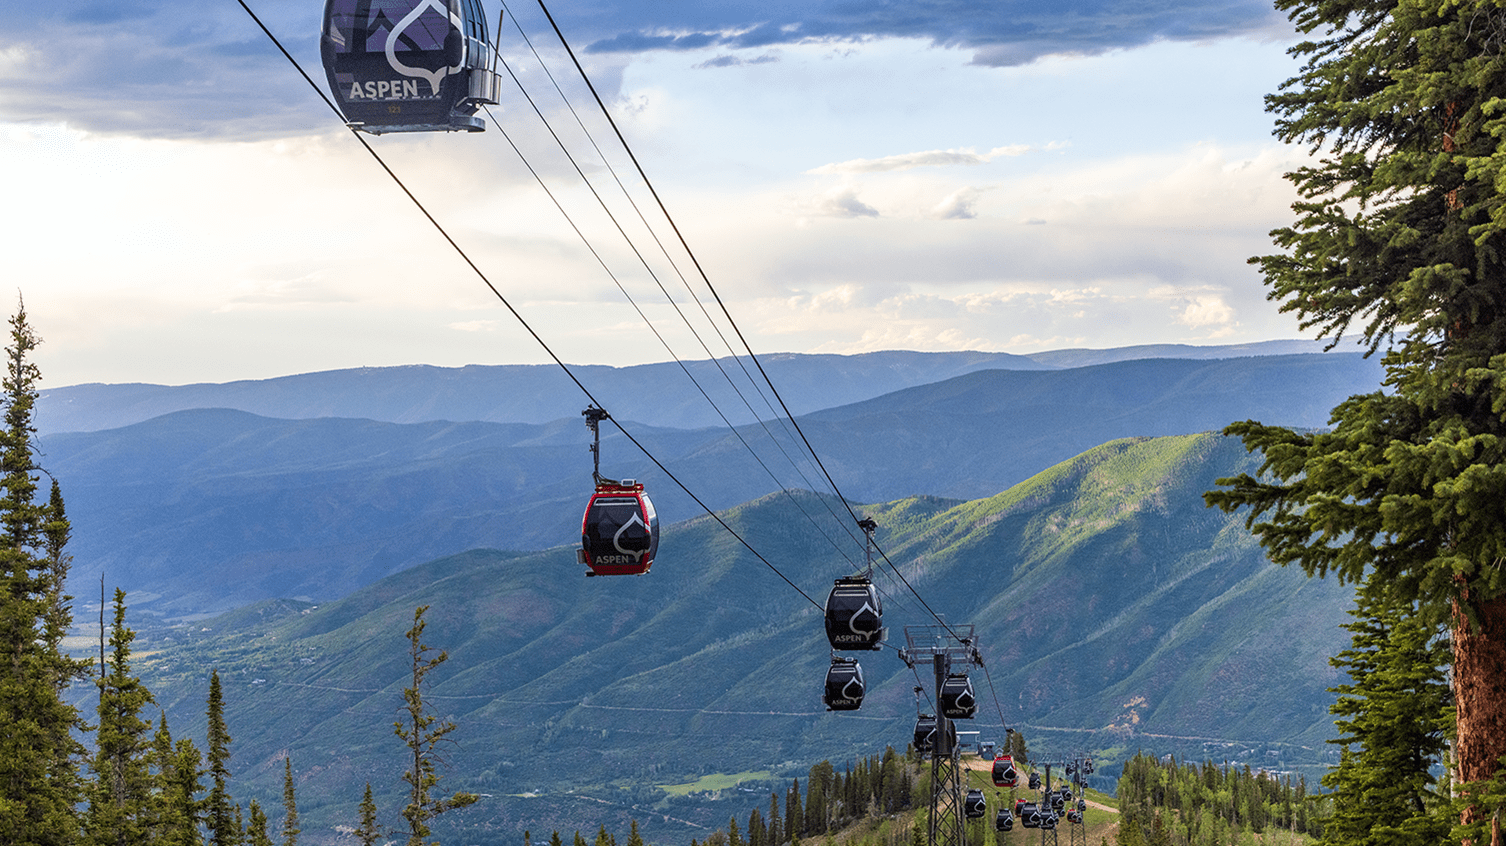 Silver Queen Gondola at Aspen Mountain, moving high above the trees, with Roaring Fork Valley illuminated in the background